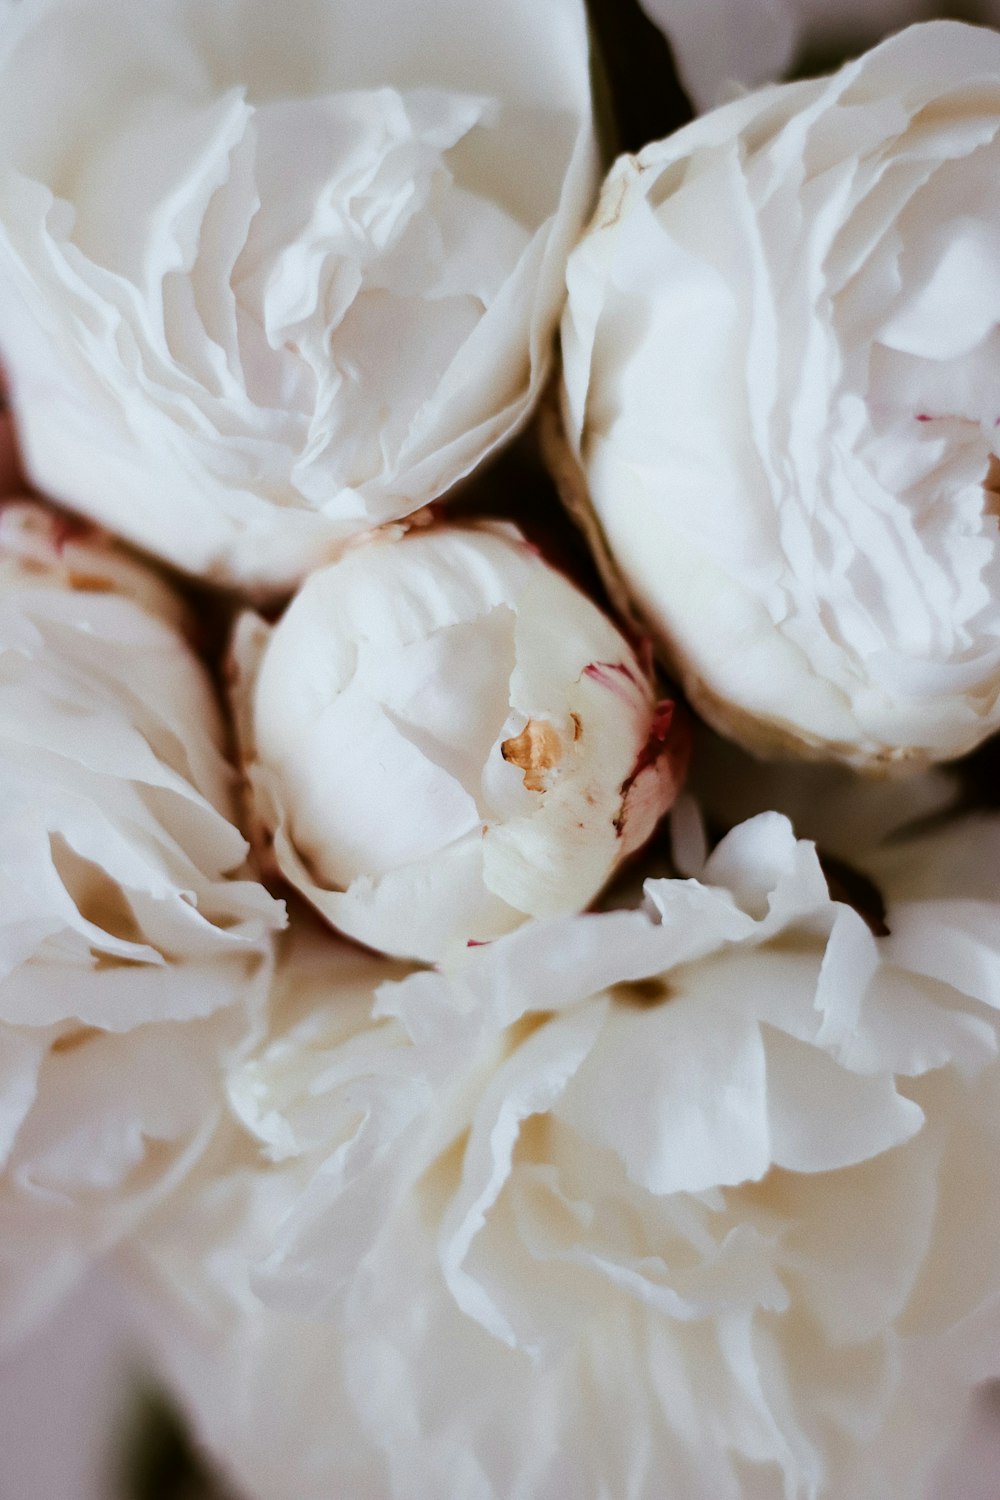 white rose petals in close up photography